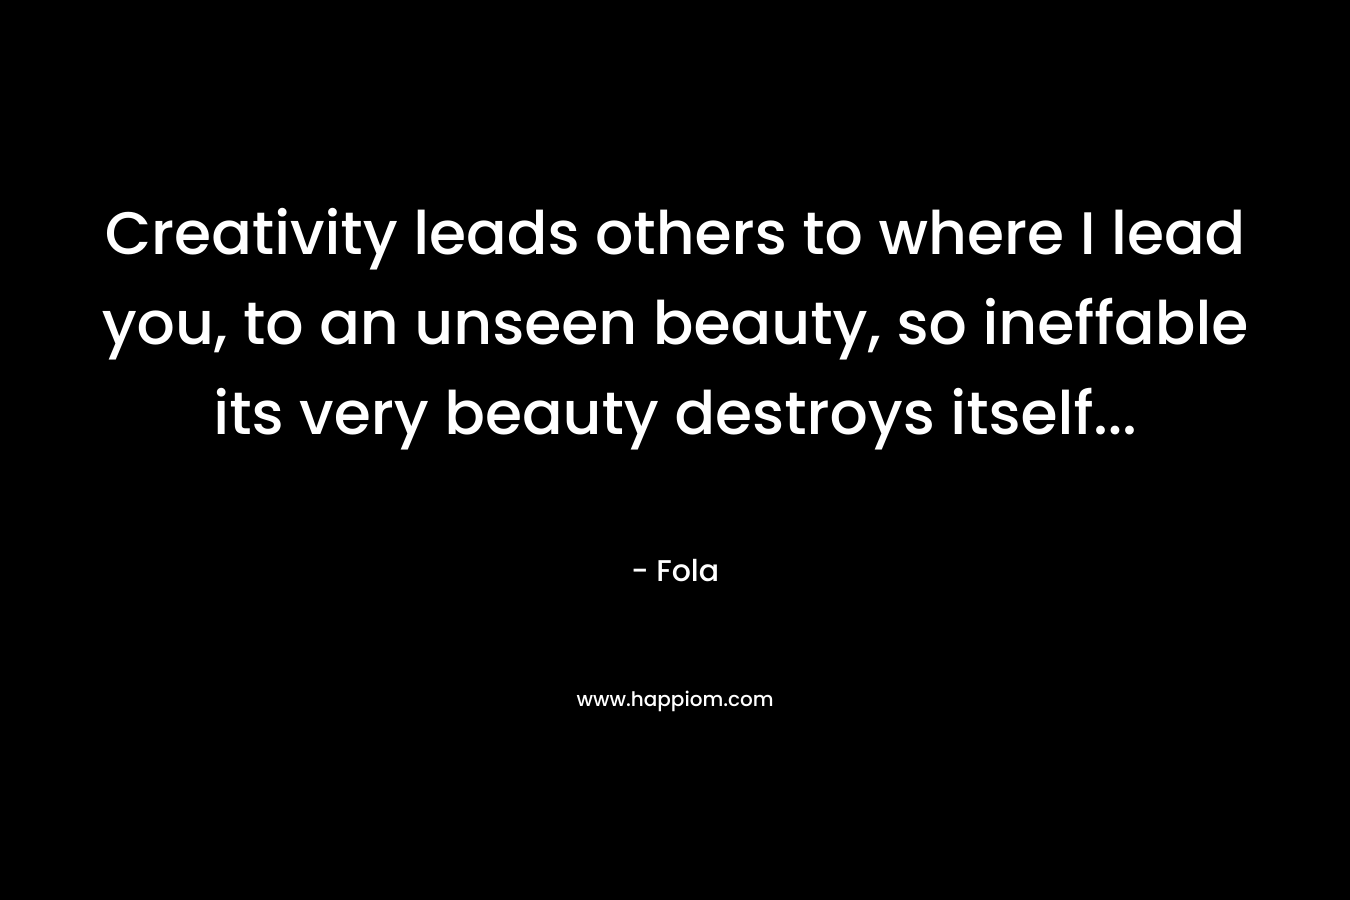 Creativity leads others to where I lead you, to an unseen beauty, so ineffable its very beauty destroys itself...